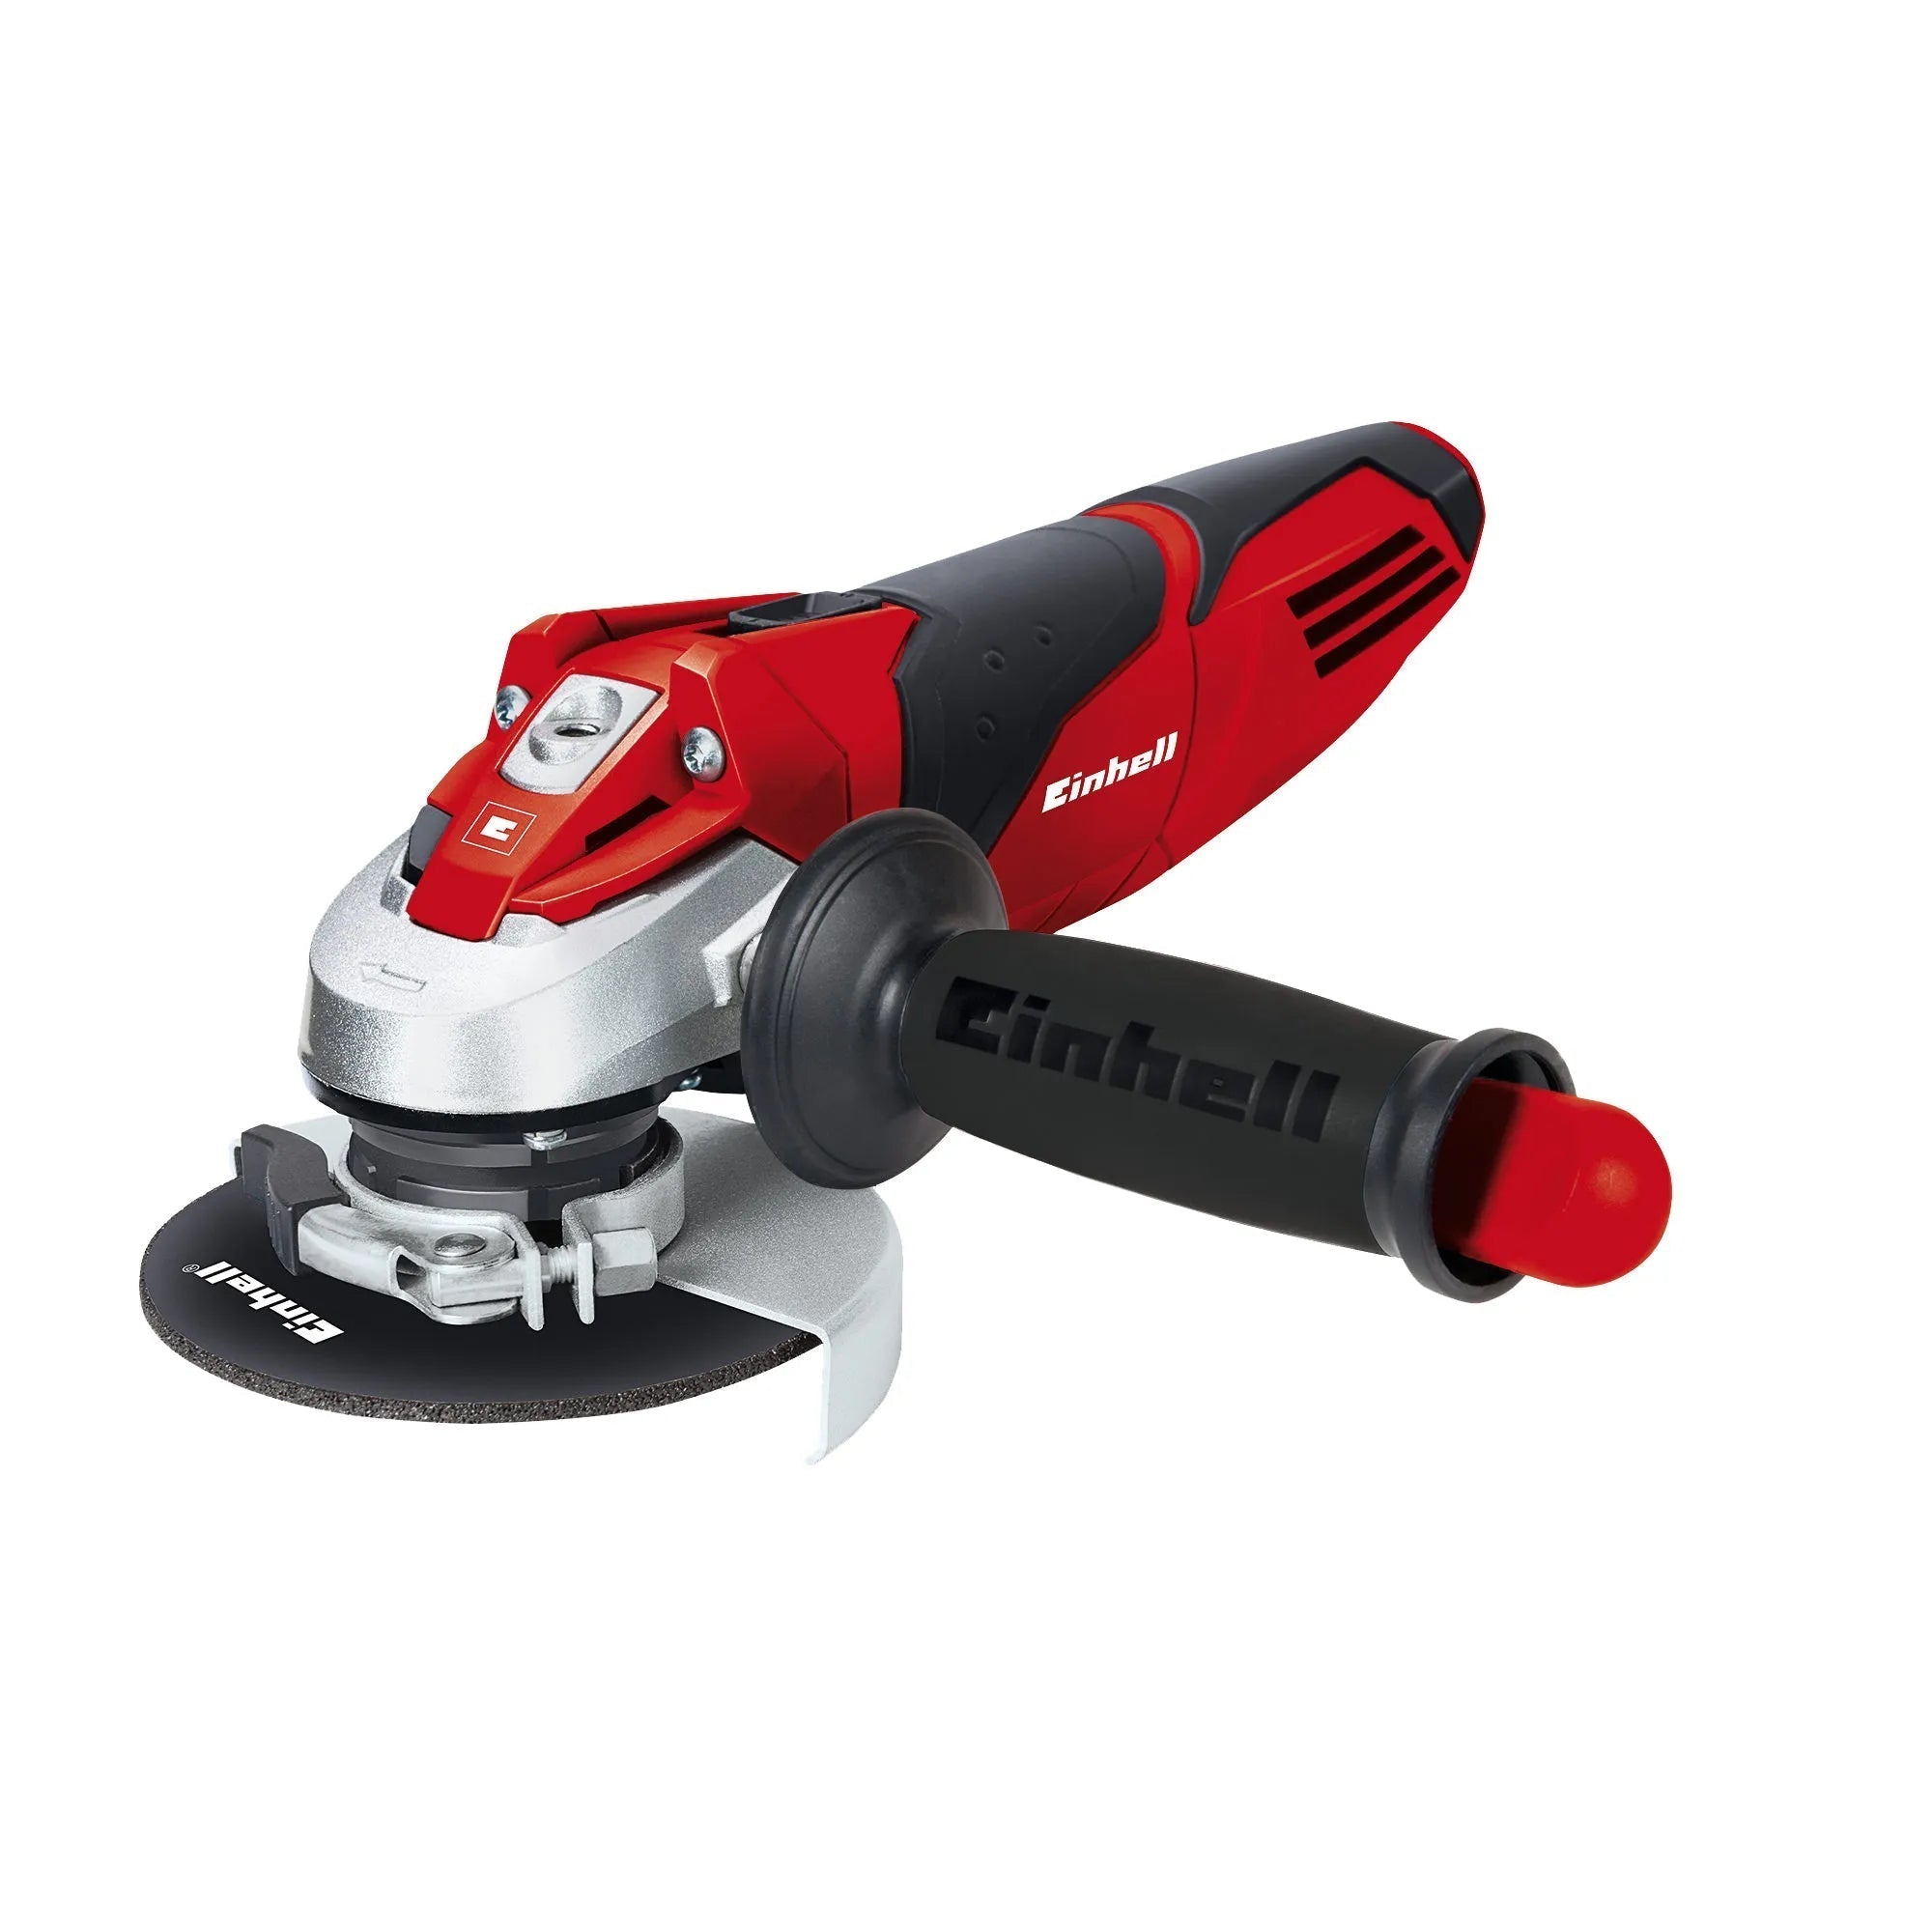 Einhell Angle Grinder TE-AG 115 4430850 Power Tool Services